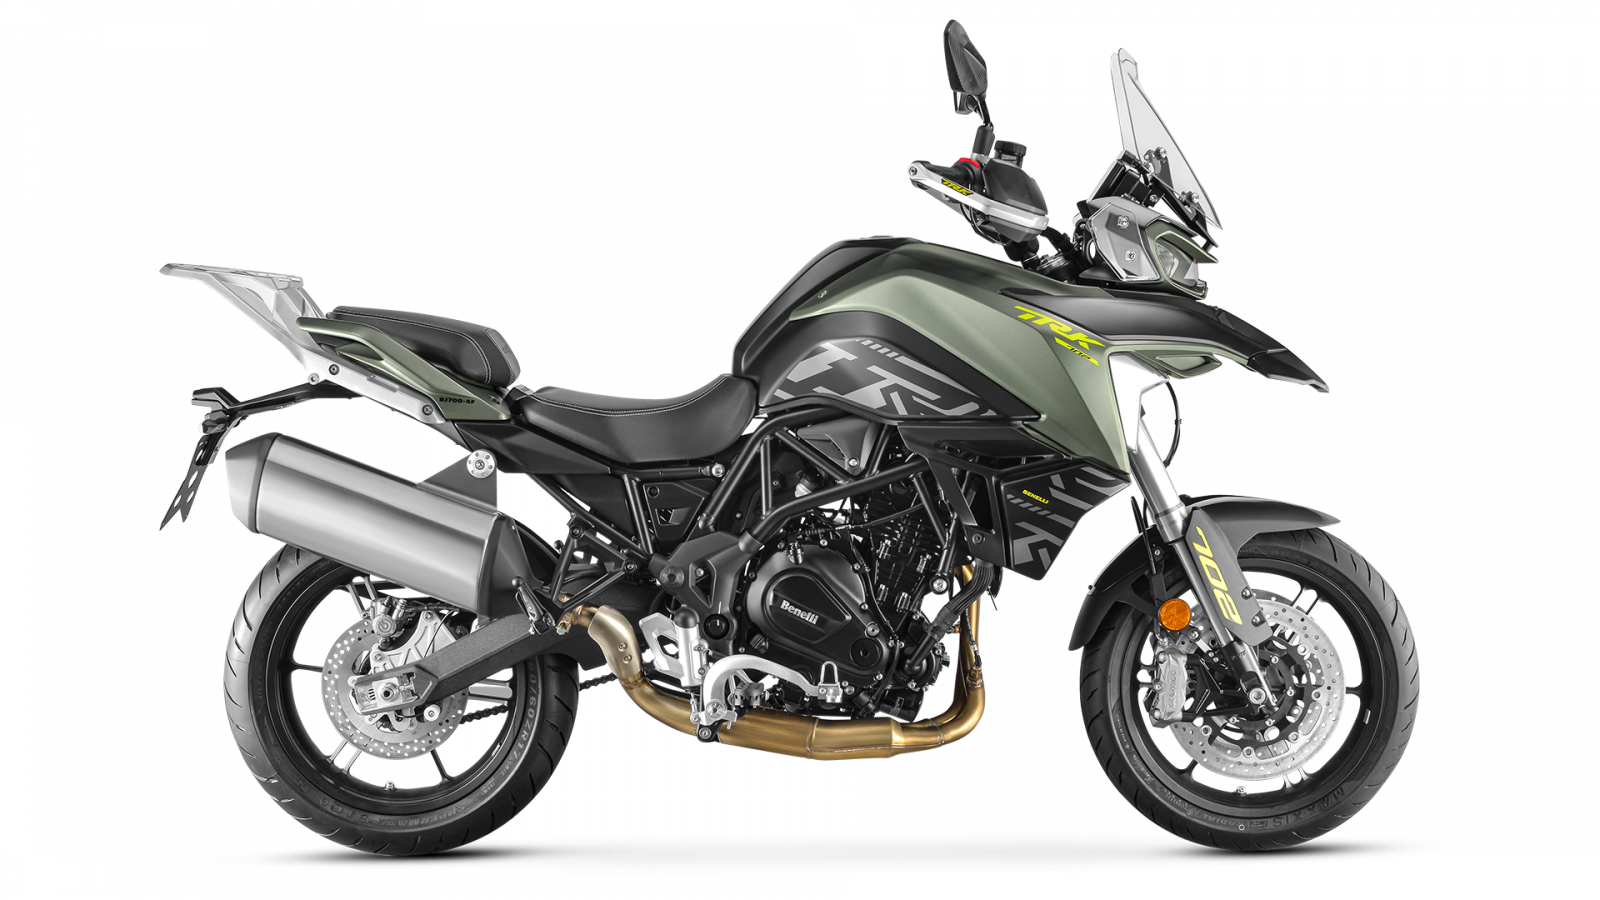 Benelli Brings Adventure to Australia with the TRK 702 and TRK 702X